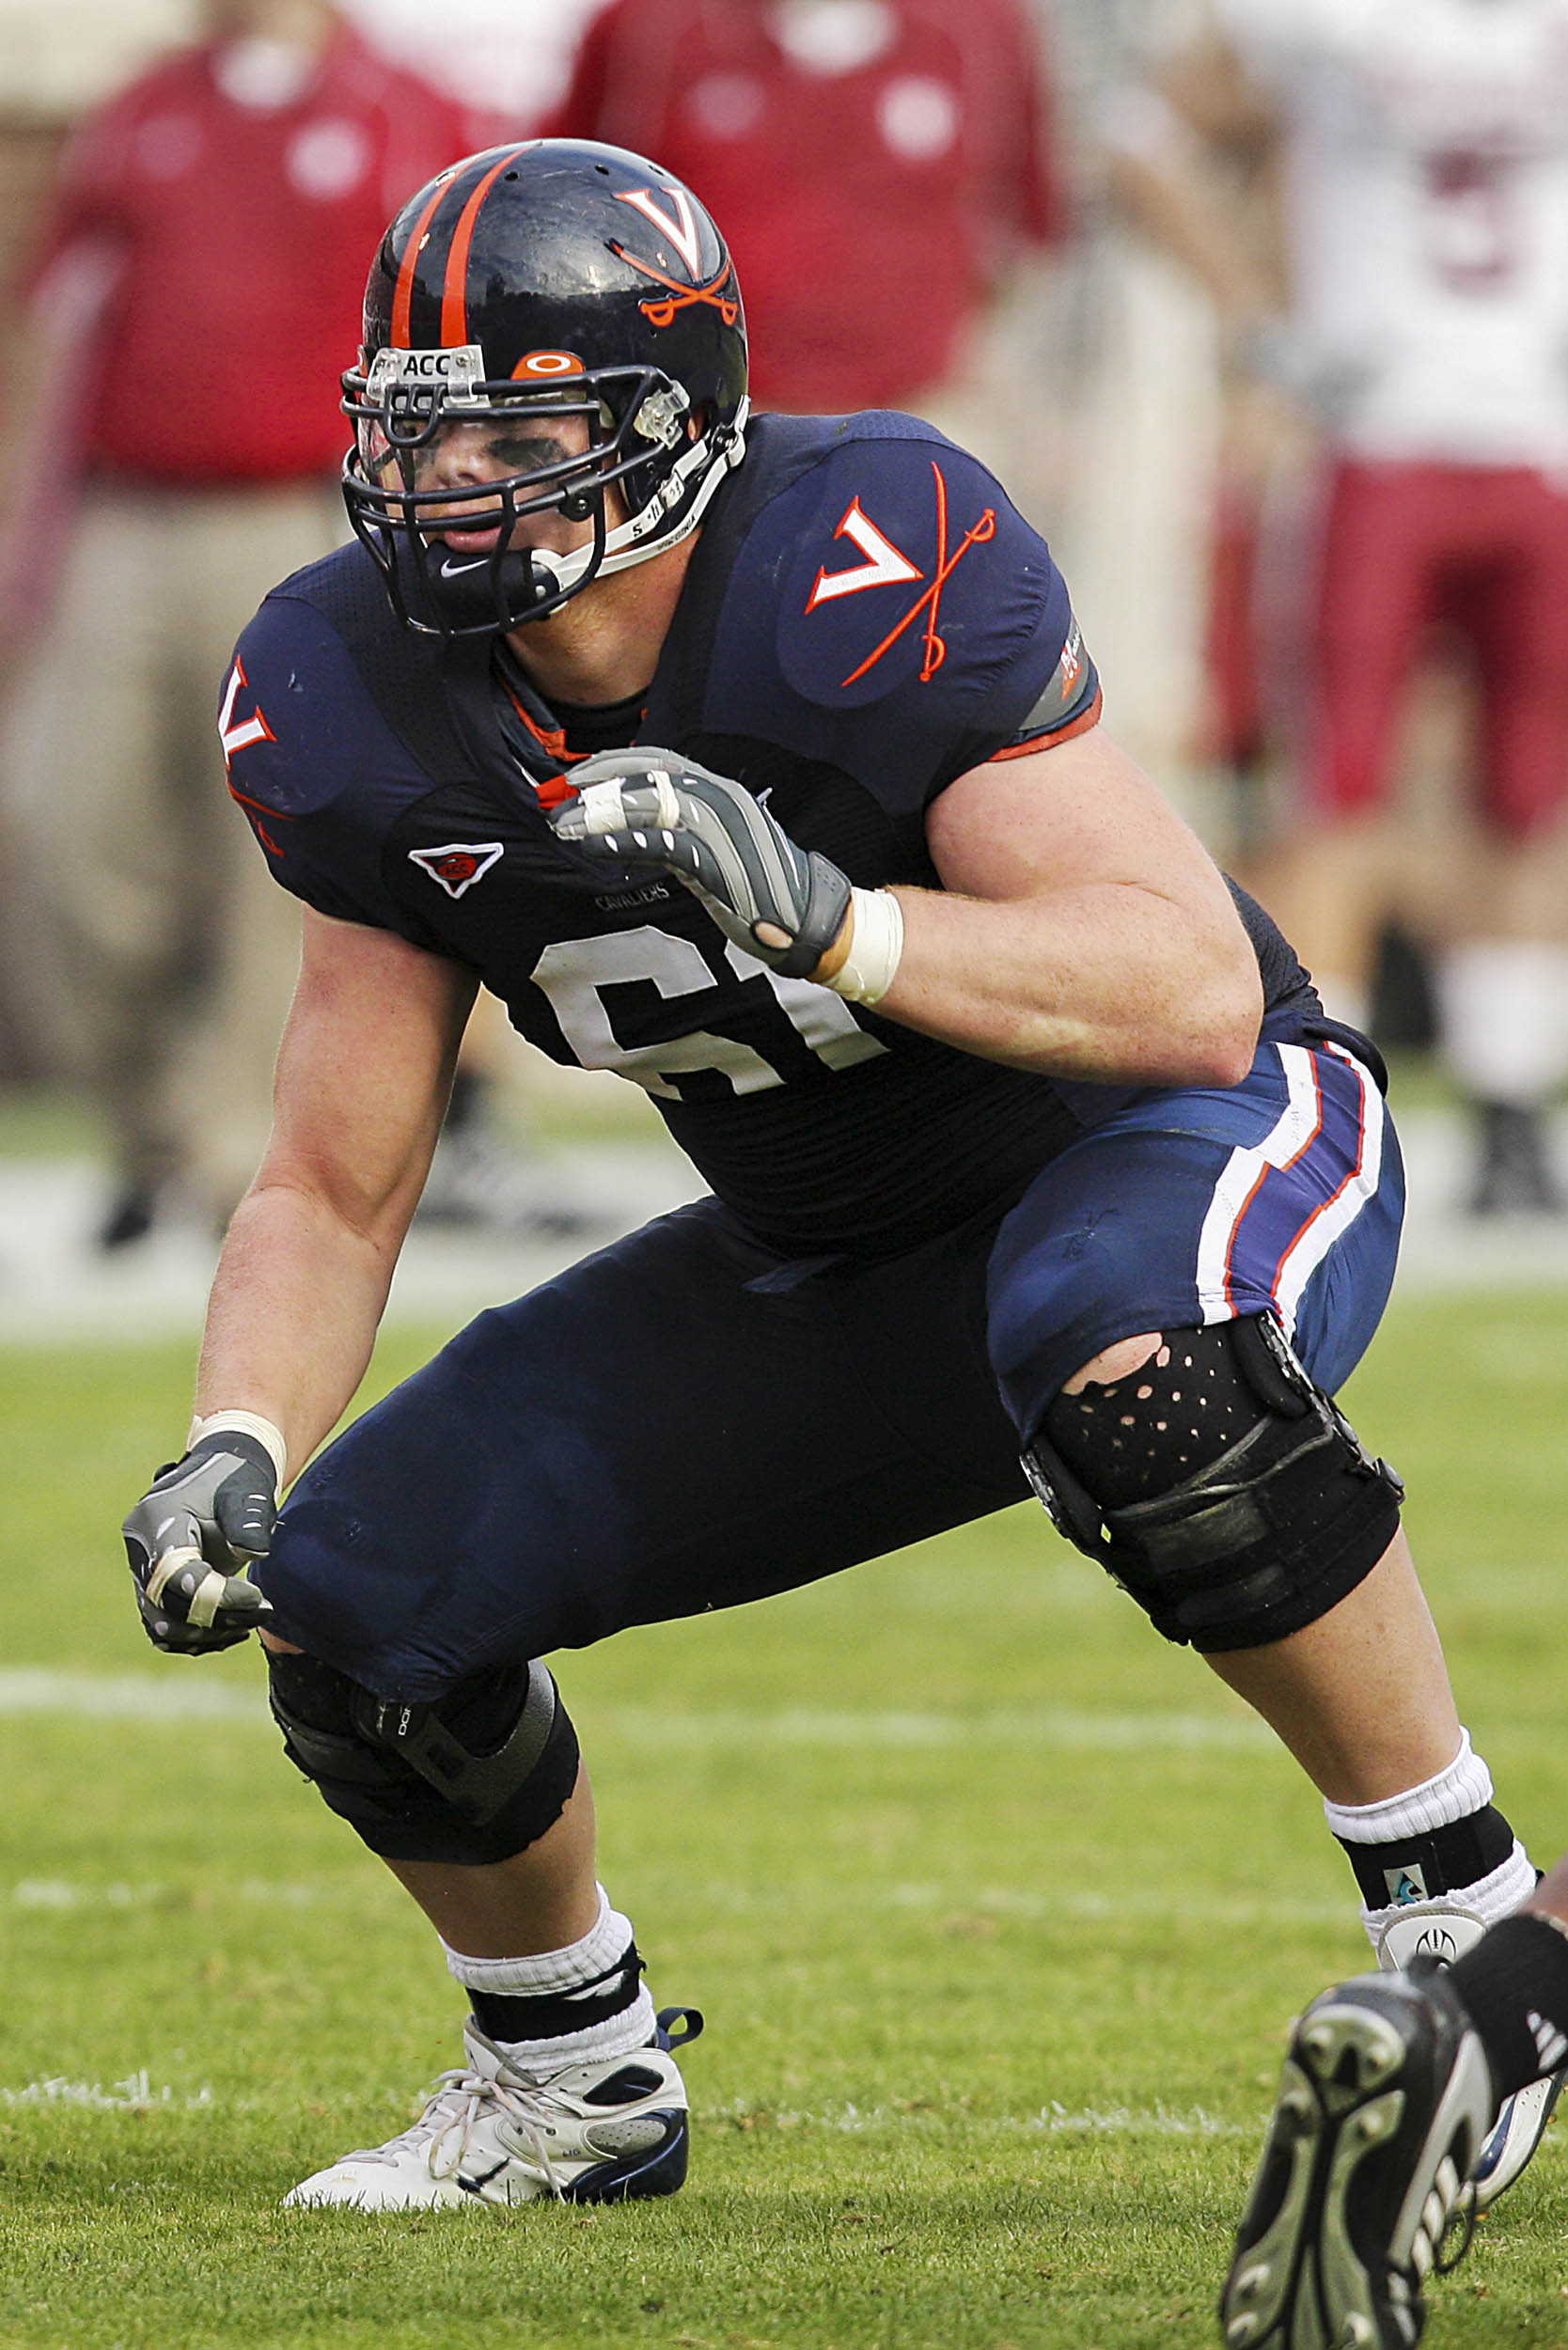 Will Barker preparing to block during a game